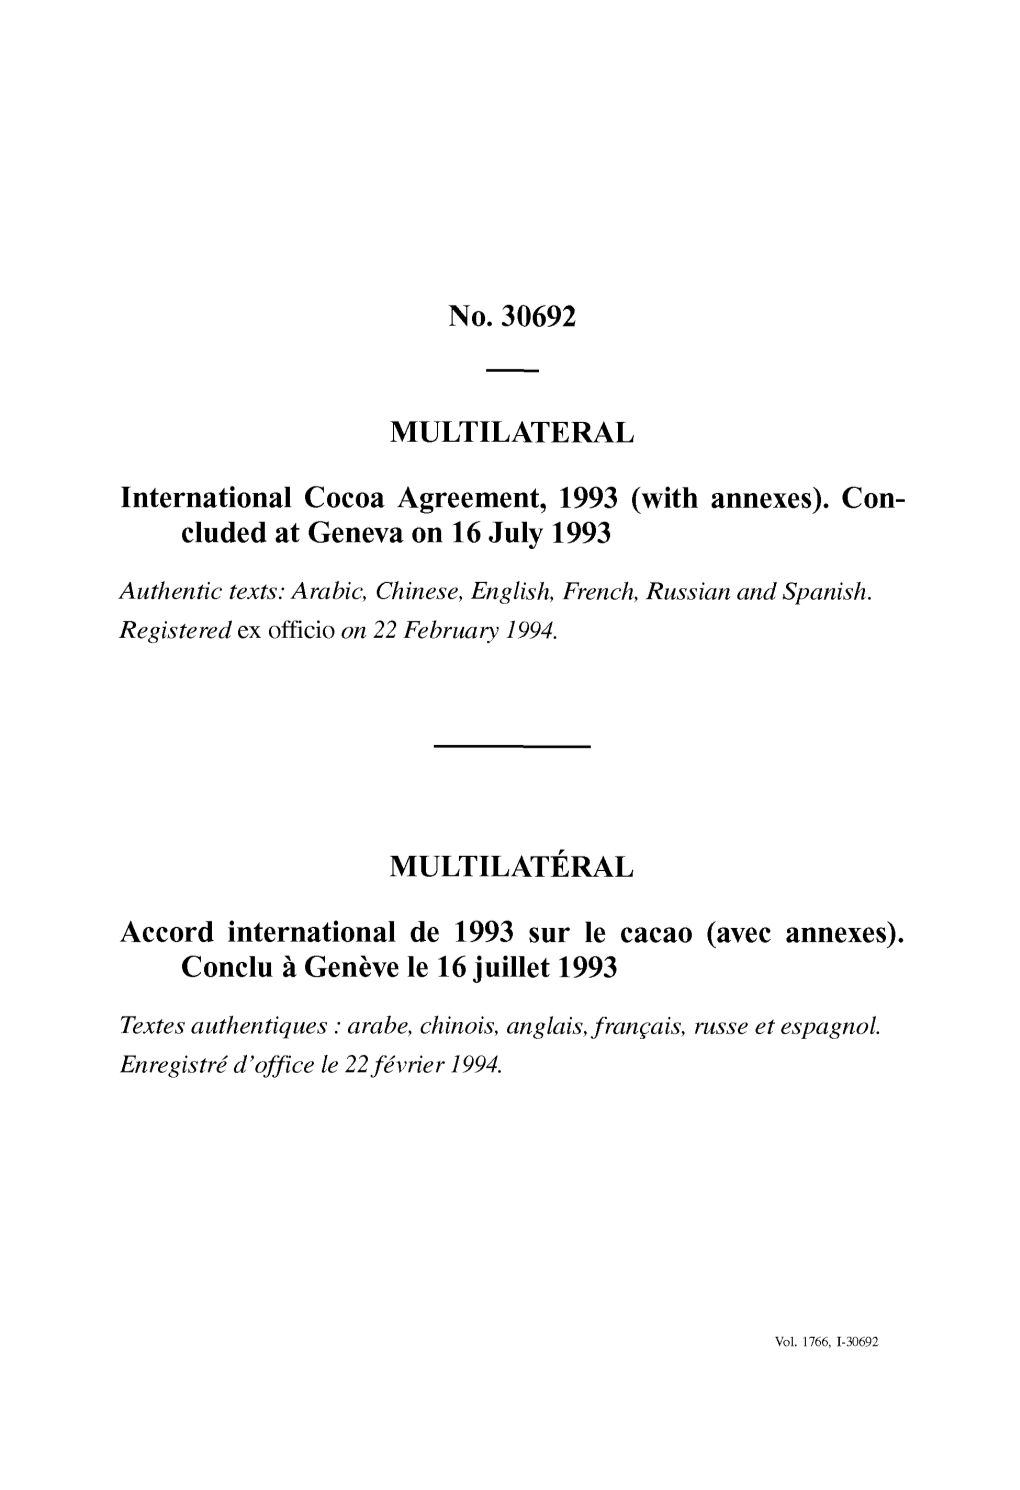 No. 30692 MULTILATERAL International Cocoa Agreement, 1993